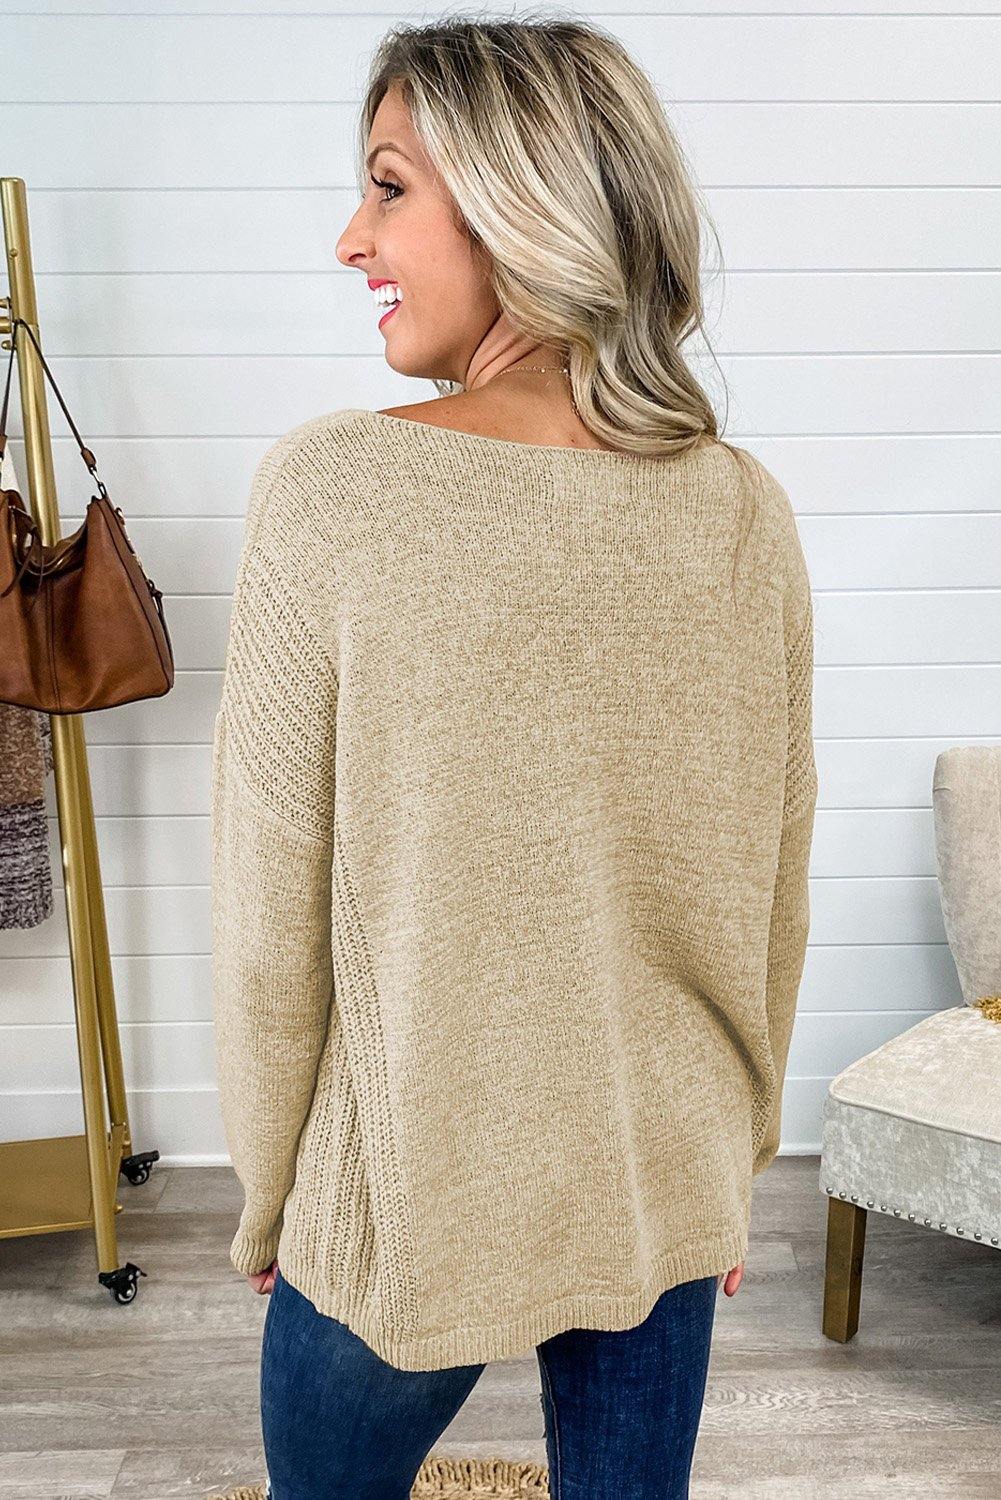 Long Sleeve Drop Shoulder Knitted Sweater - L & M Kee, LLC